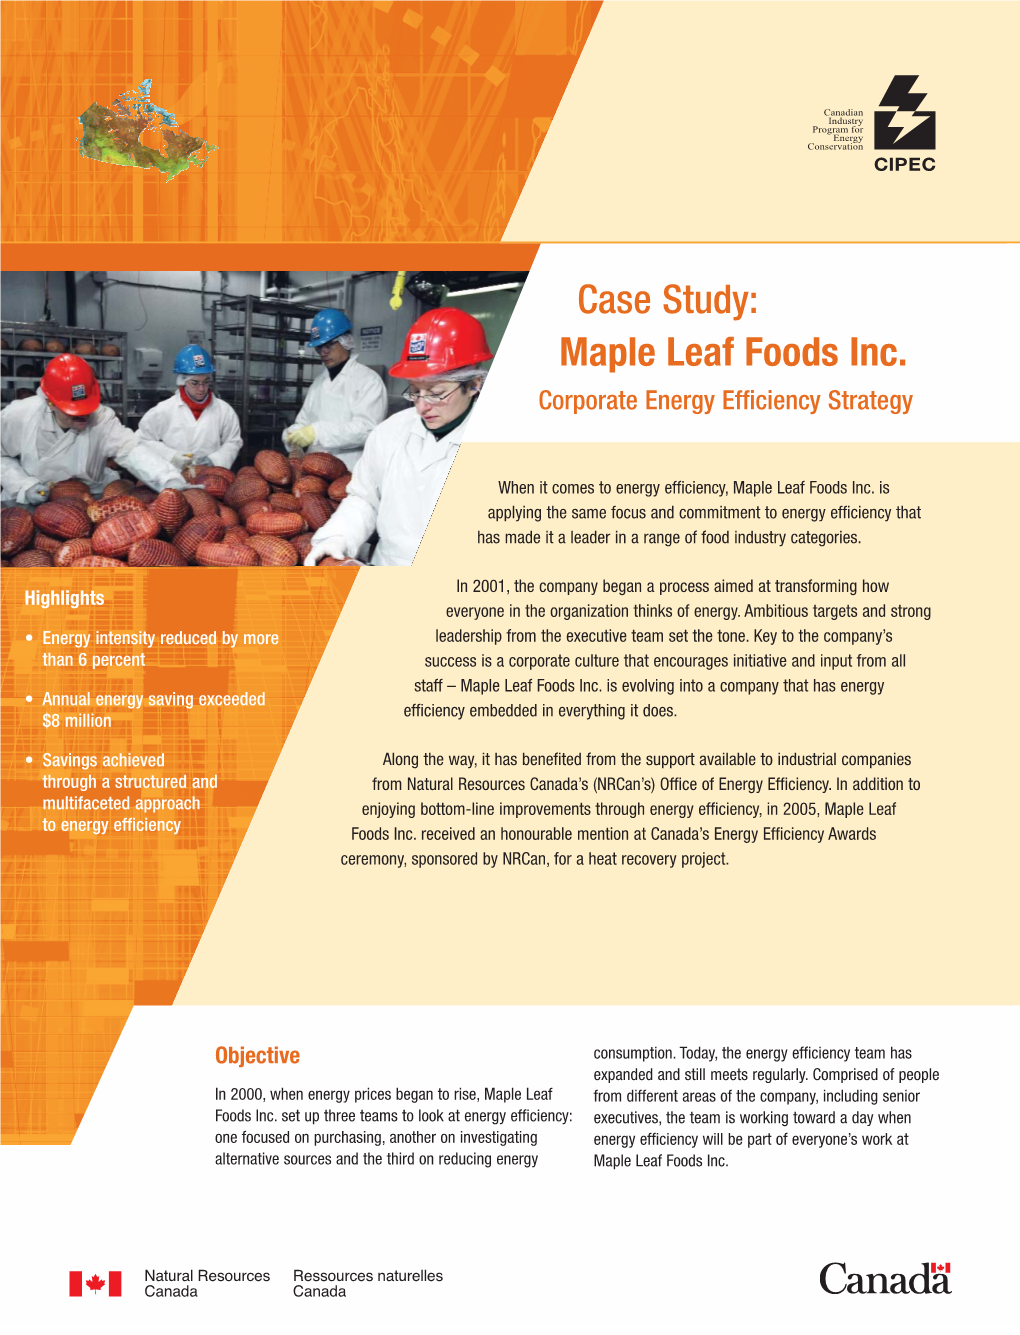 Case Study: Maple Leaf Foods Inc. Corporate Energy Efficiency Strategy